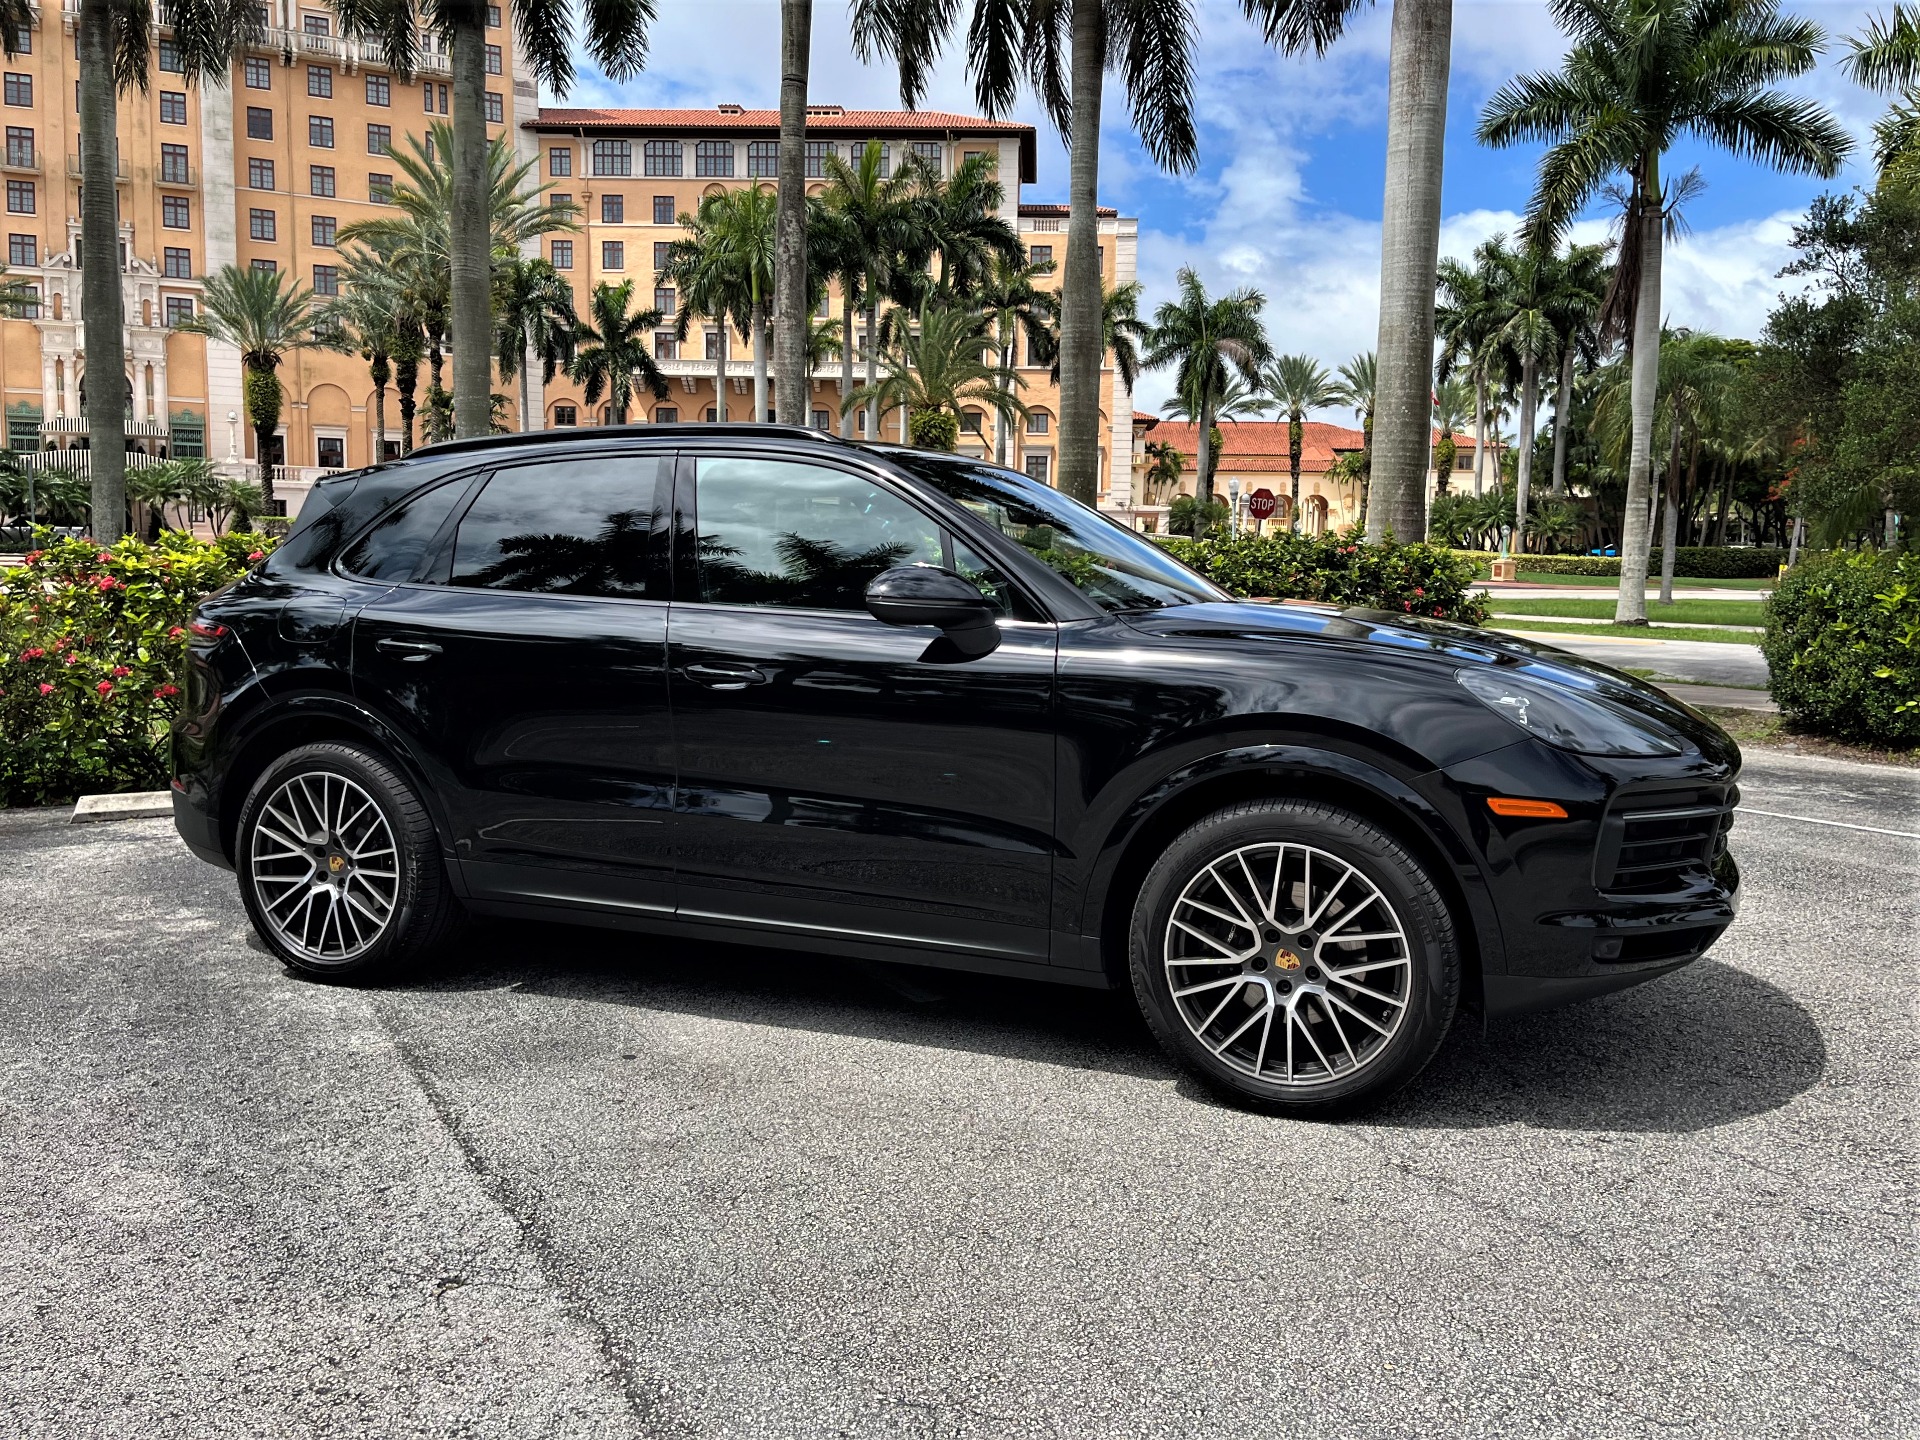 Used 2020 Porsche Cayenne for sale $78,850 at The Gables Sports Cars in Miami FL 33146 3